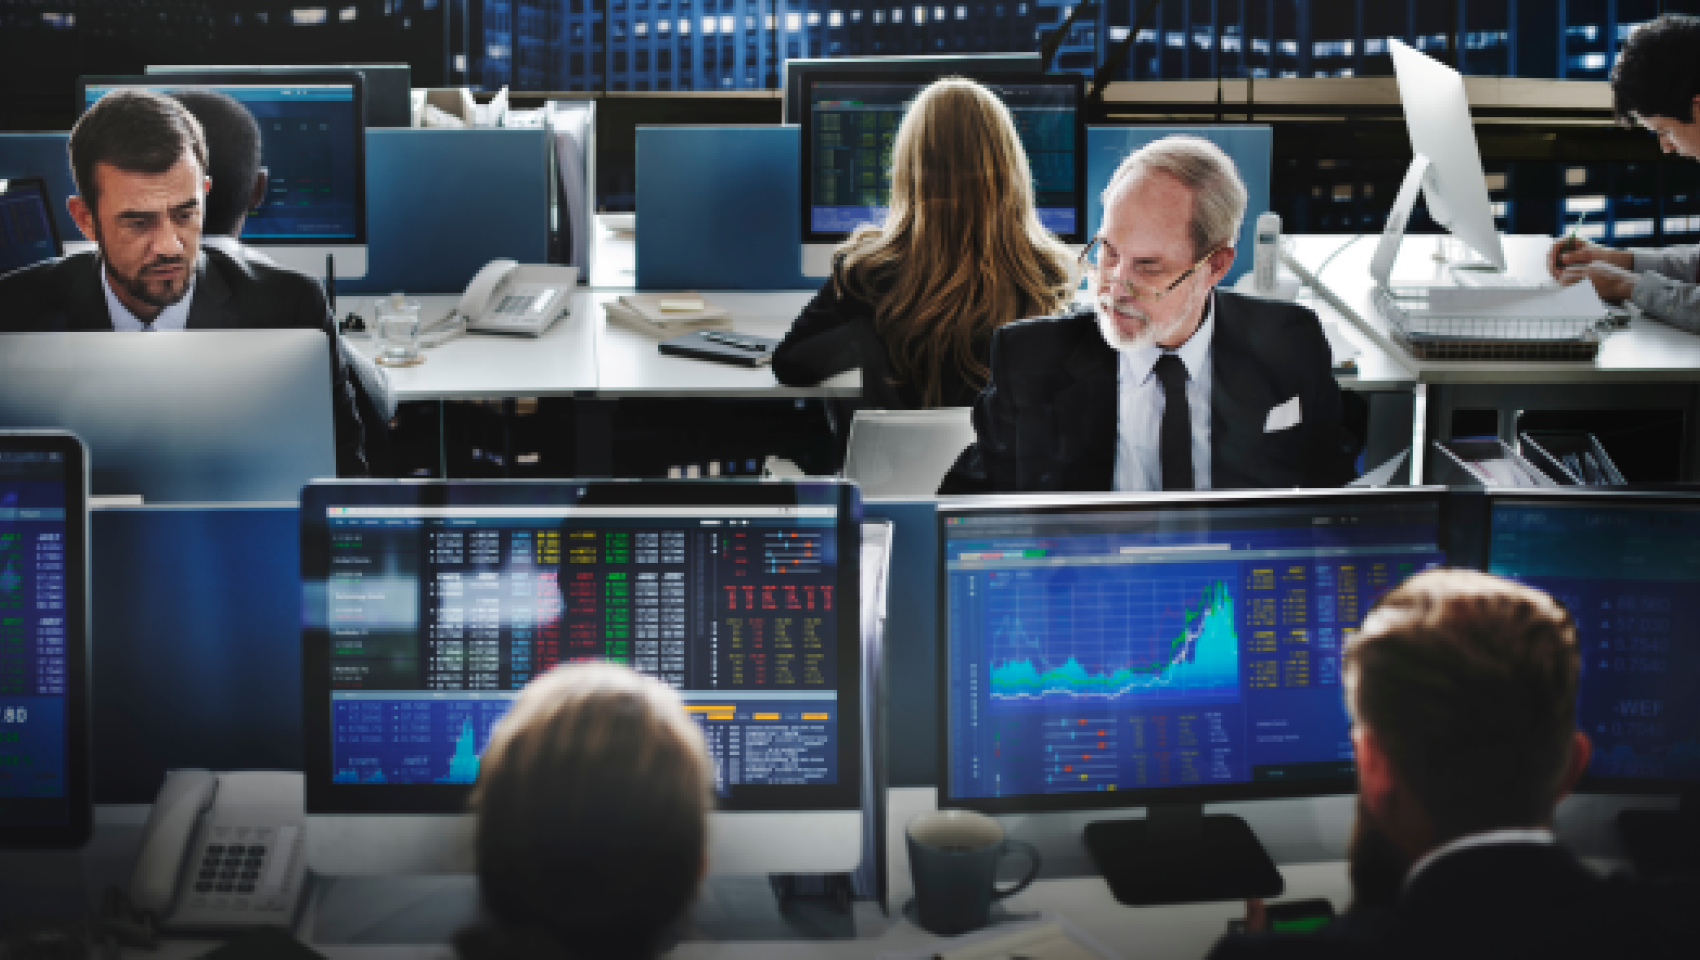 Broker sitting in front of their computers at the stock market